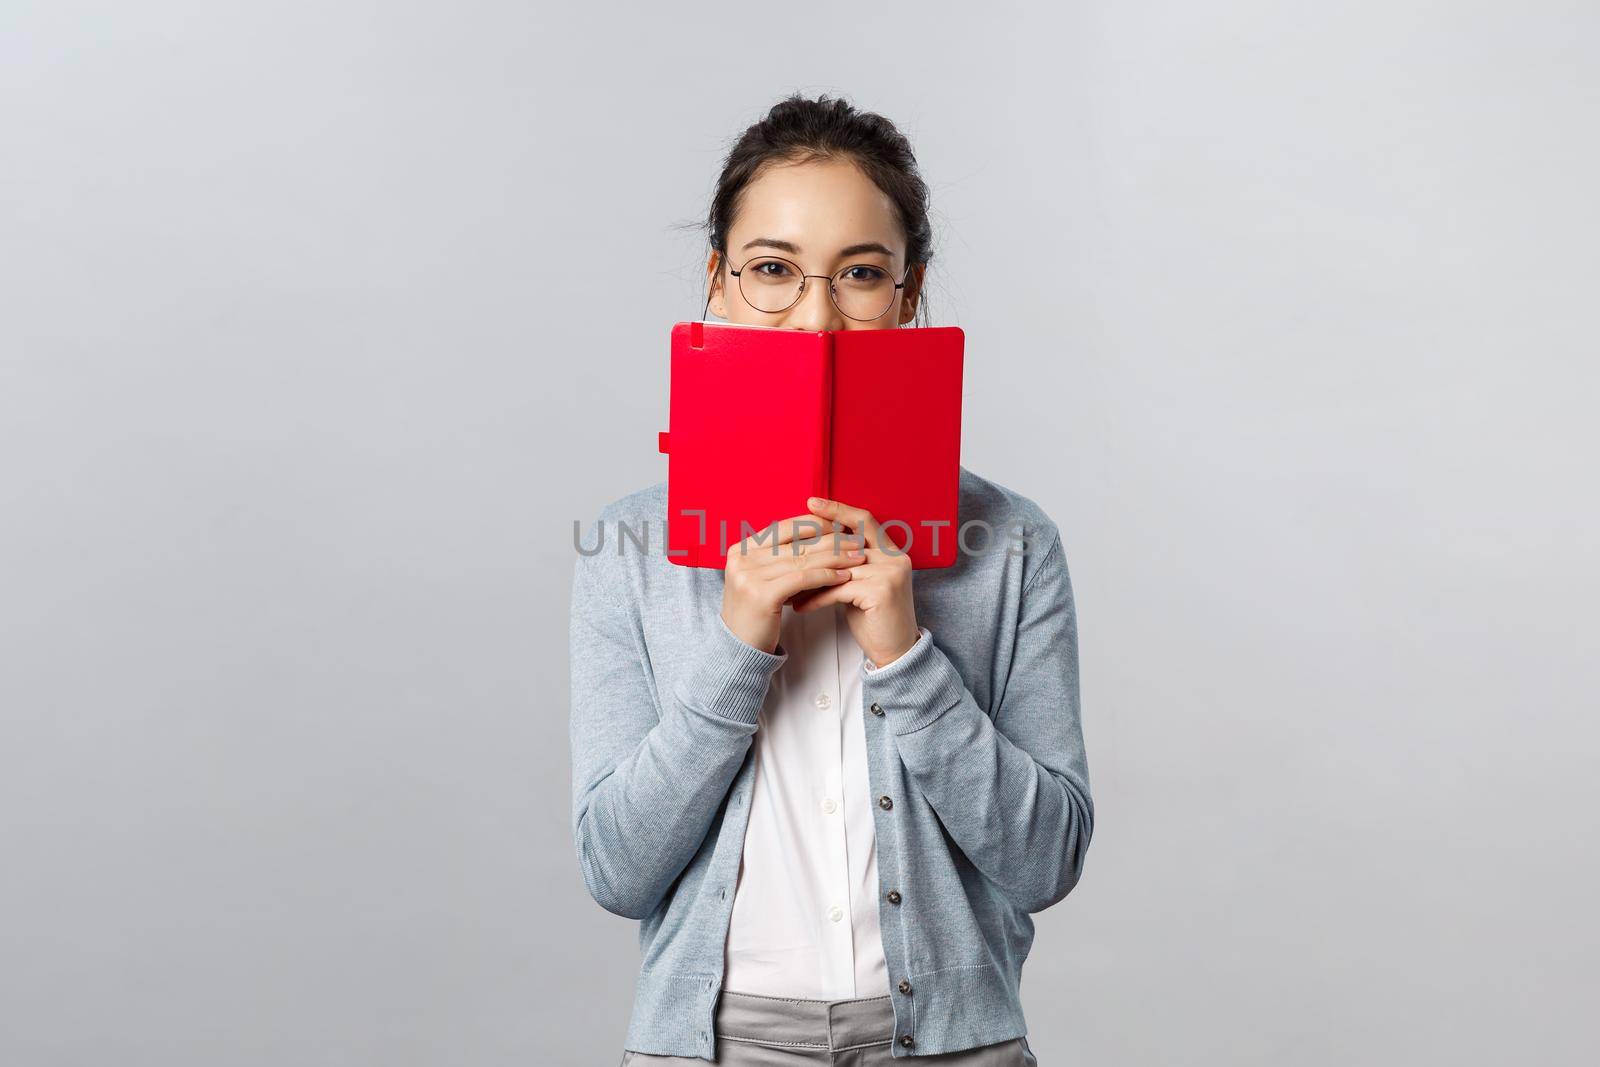 Teaching, education and university lifestyle concept. Silly blushing asian girl hiding her face behind diary, holding notebook or planner, hiding something she wrote from people, smiling with eyes.